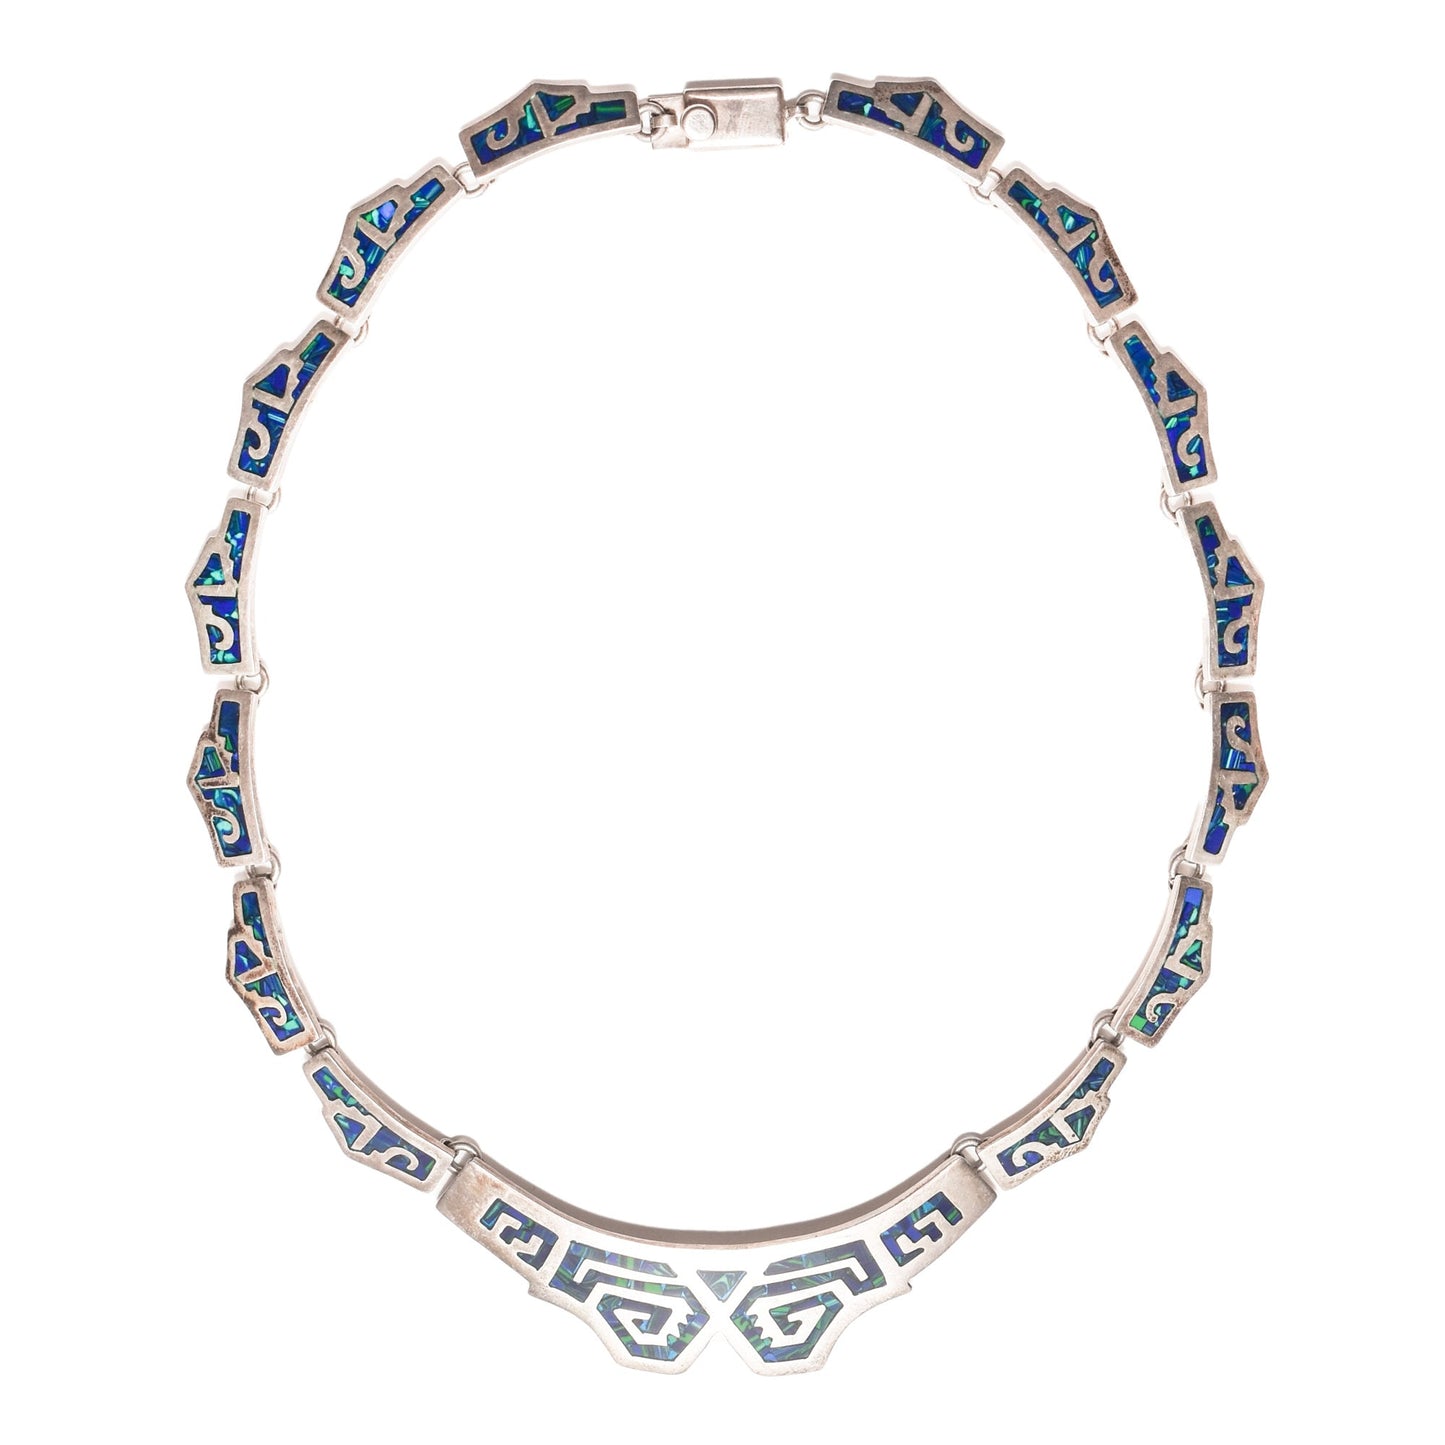 Modernist TAXCO sterling silver collar necklace with blue and green mosaic tribal design on a white background, 17.5 inches in length